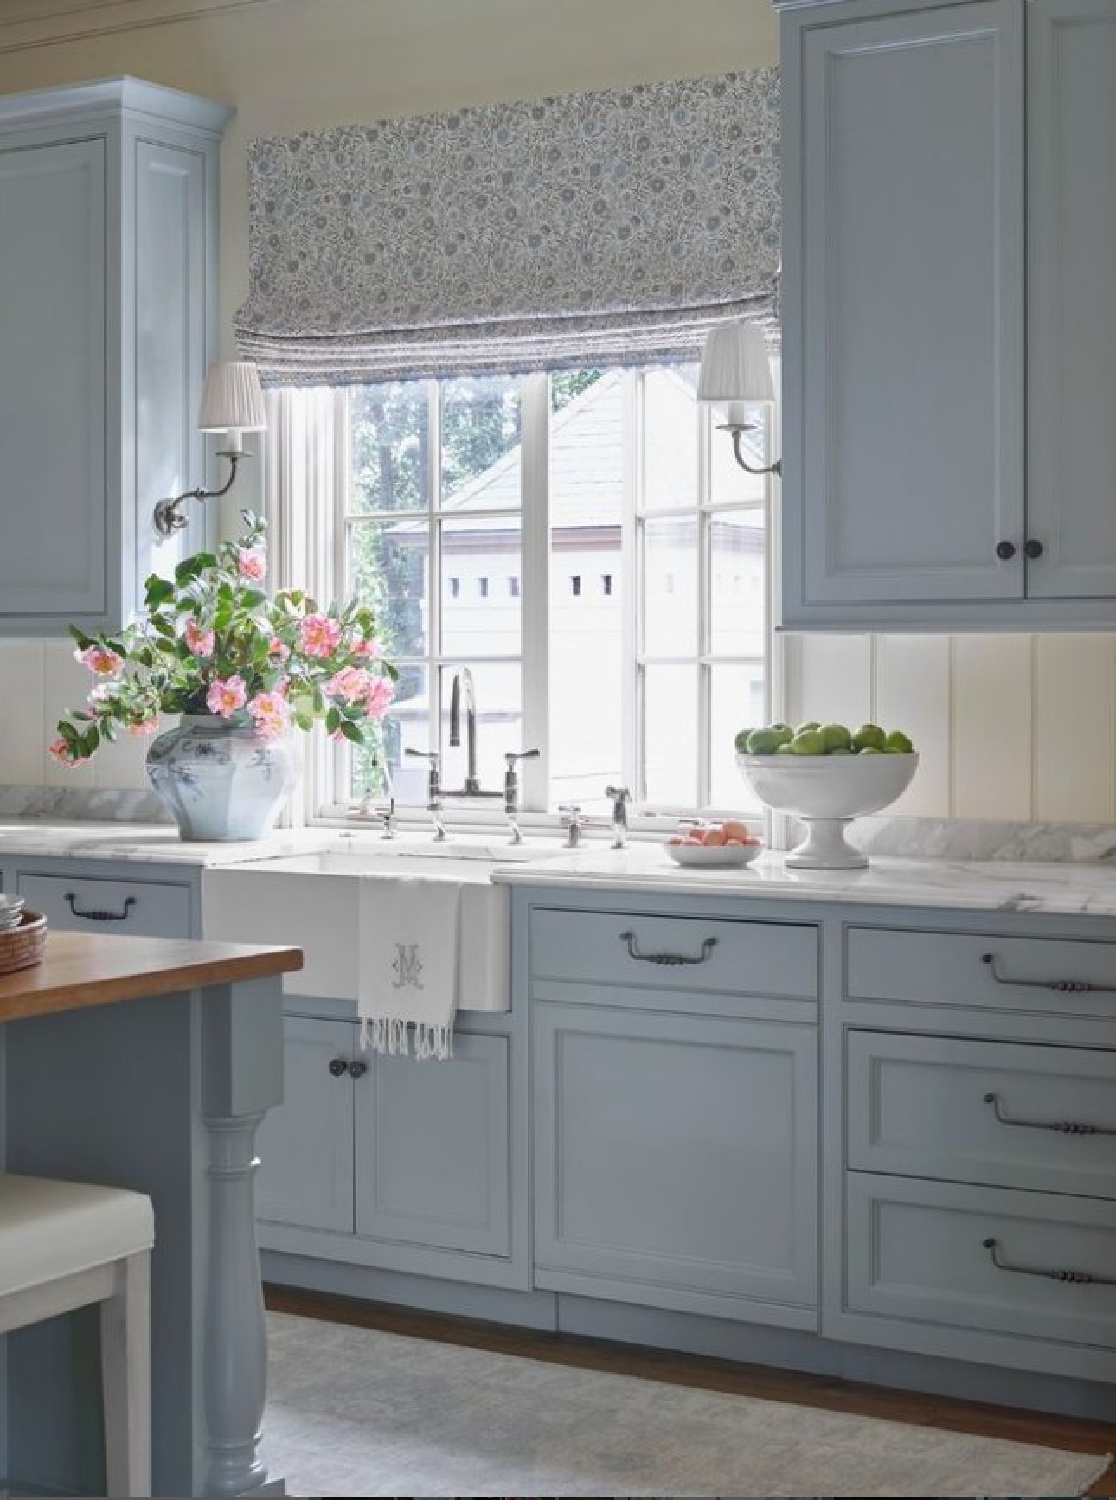 Farrow & Ball Light Blue kitchen cabinets in a traditional style kitchen by @laurendeloachinteriors. #farrowandballlightblue #bluekitchencabinets